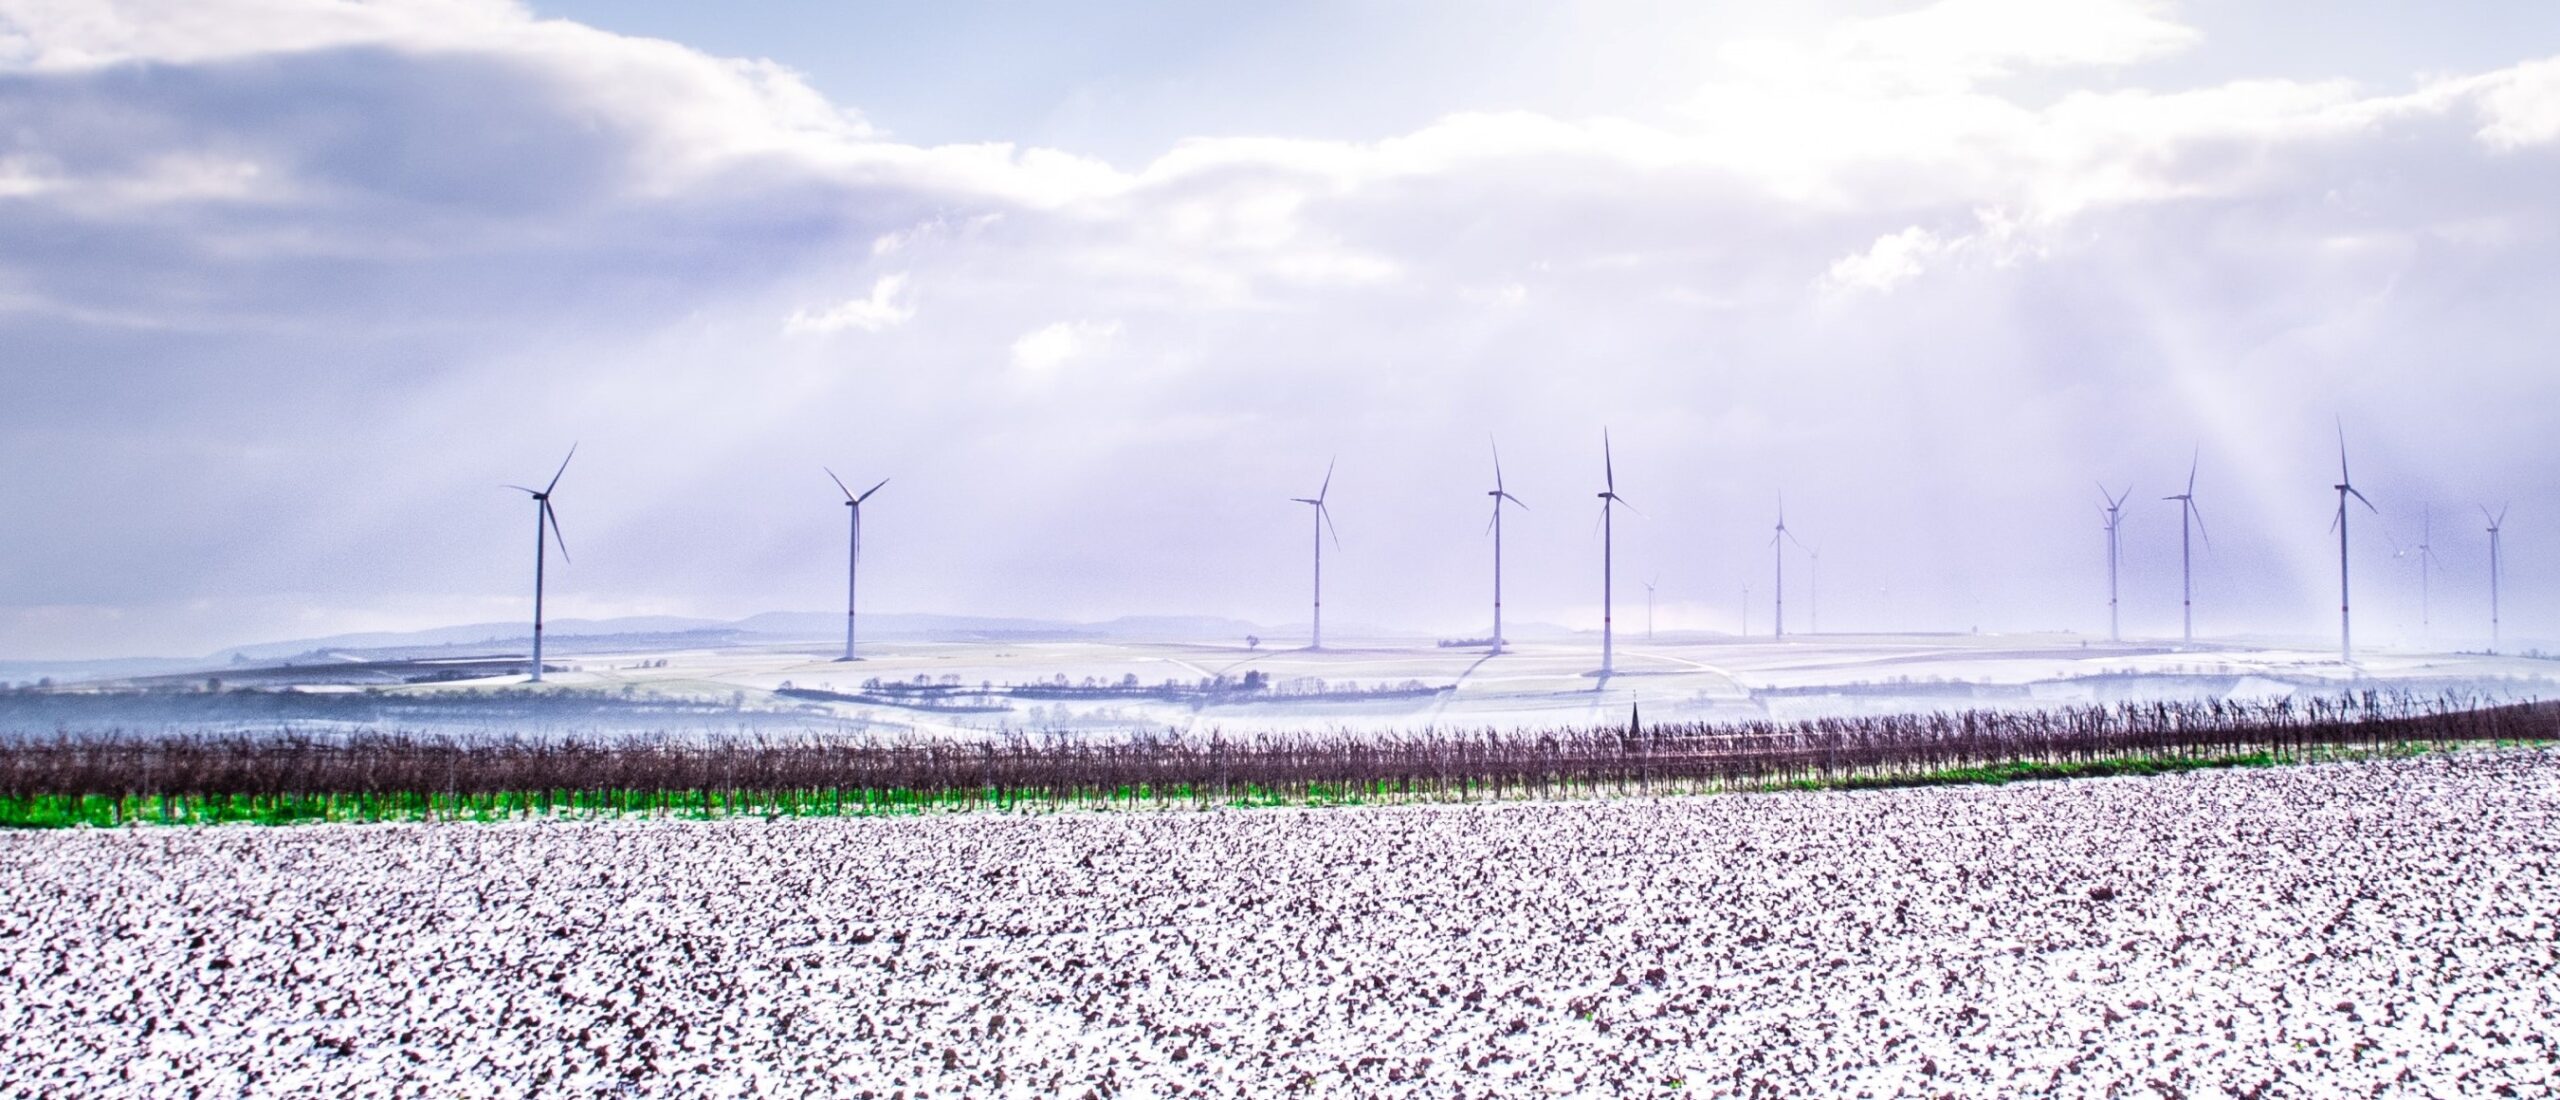 New Study by ArcVera Shows Texas Icing Led to Over $4 Billion Loss for Wind Farms